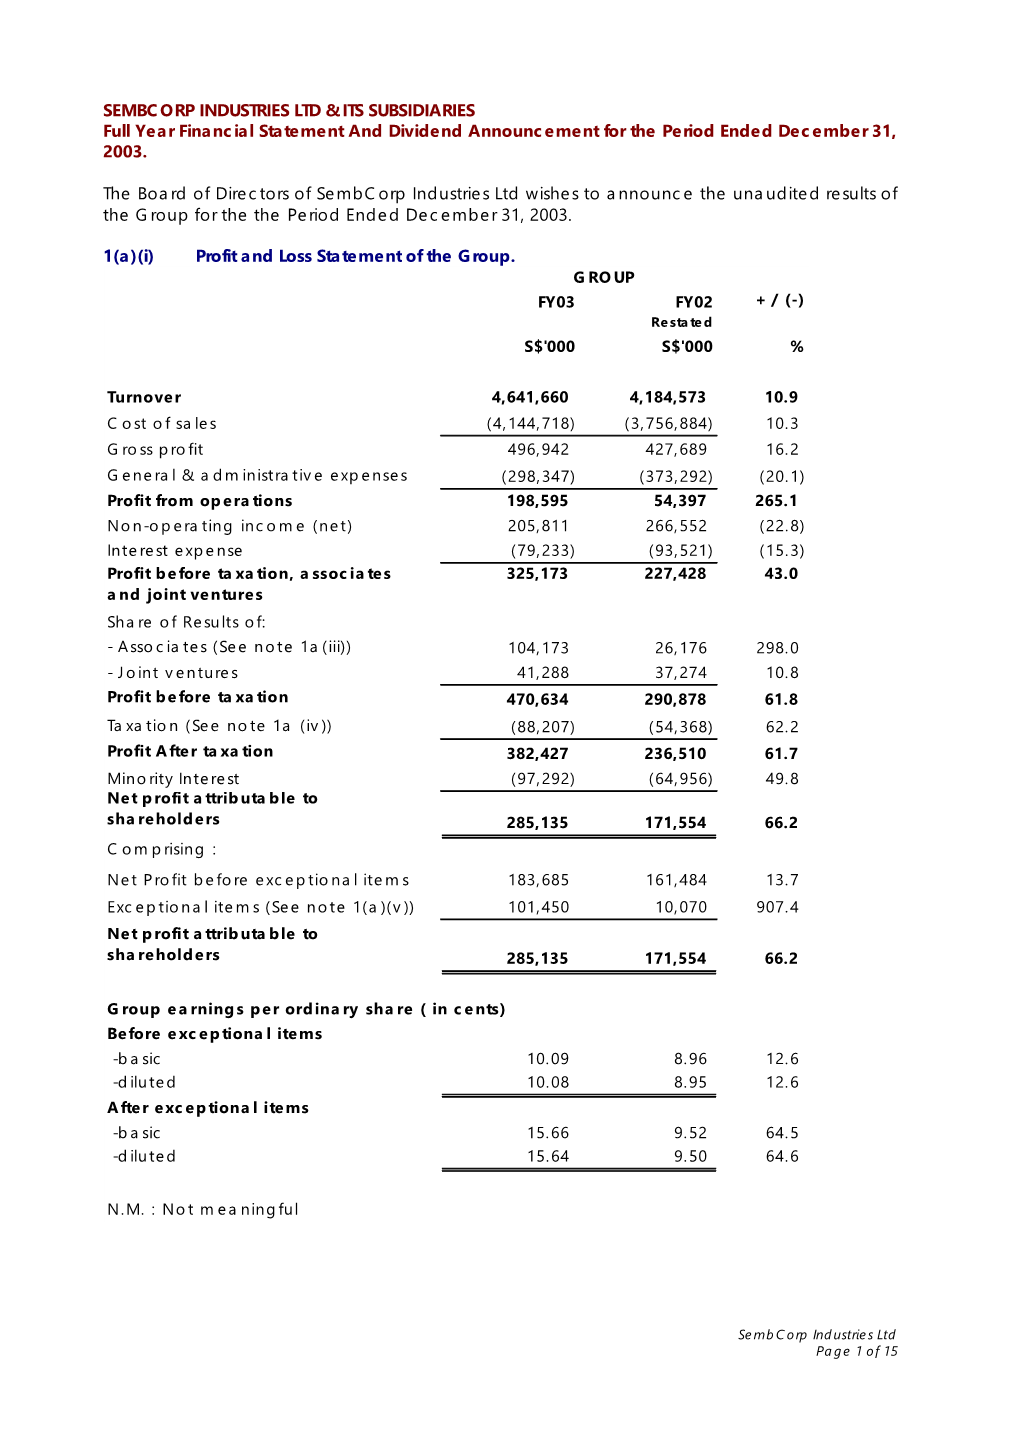 Financial Statement and Dividend Announcement for the Period Ended December 31, 2003